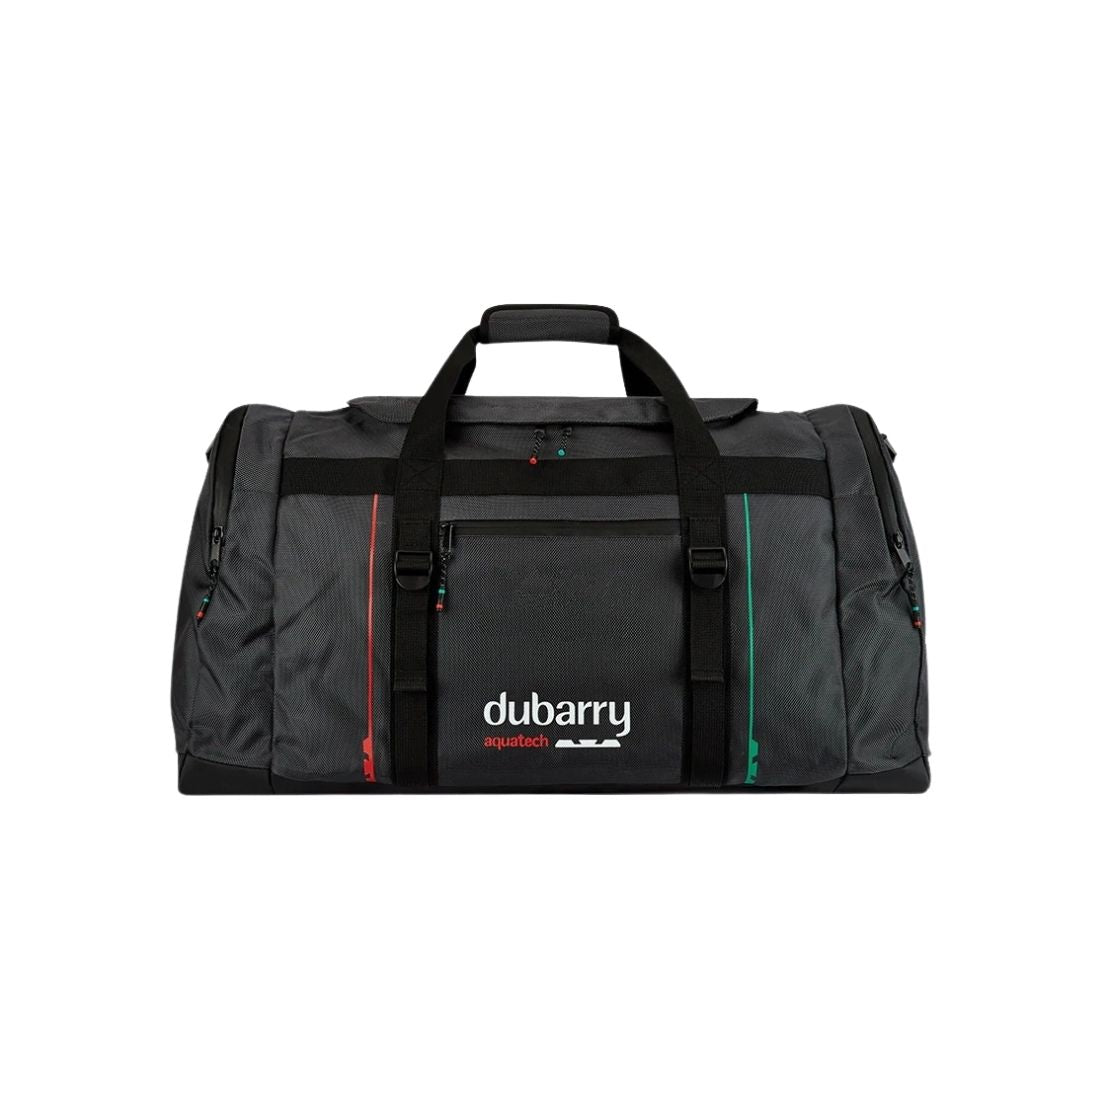 DUBARRY Pisa 60L Holdall Duffle Bag GRAPHITE (Online only*)